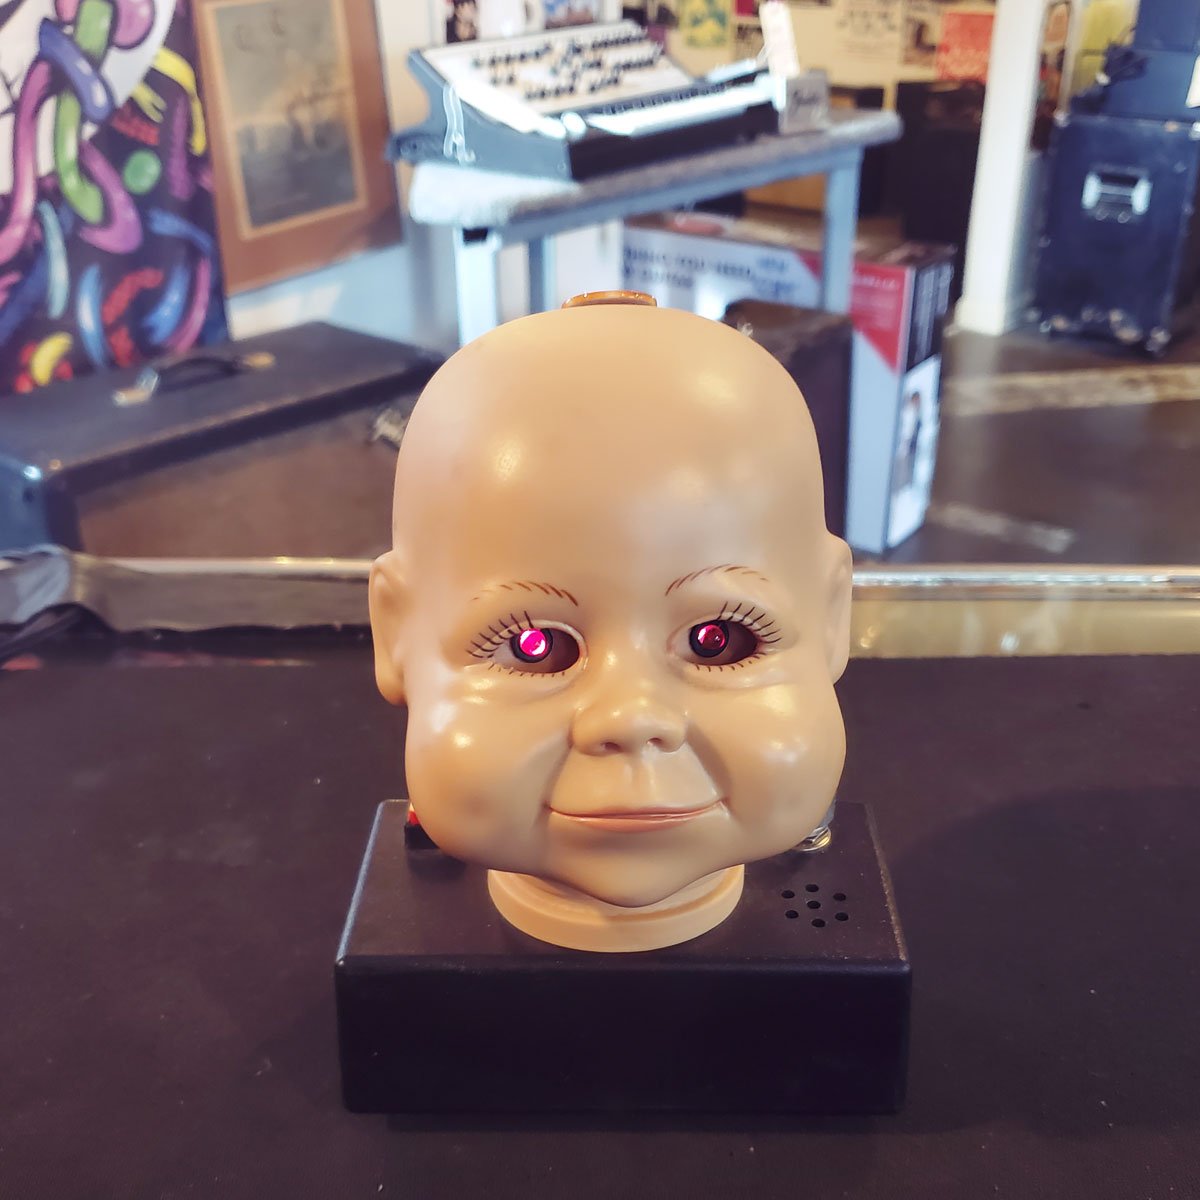  I couldn’t think of anything weirder than our Theremin baby head. Definitely creepy and weird but right at home here at Old Town. 